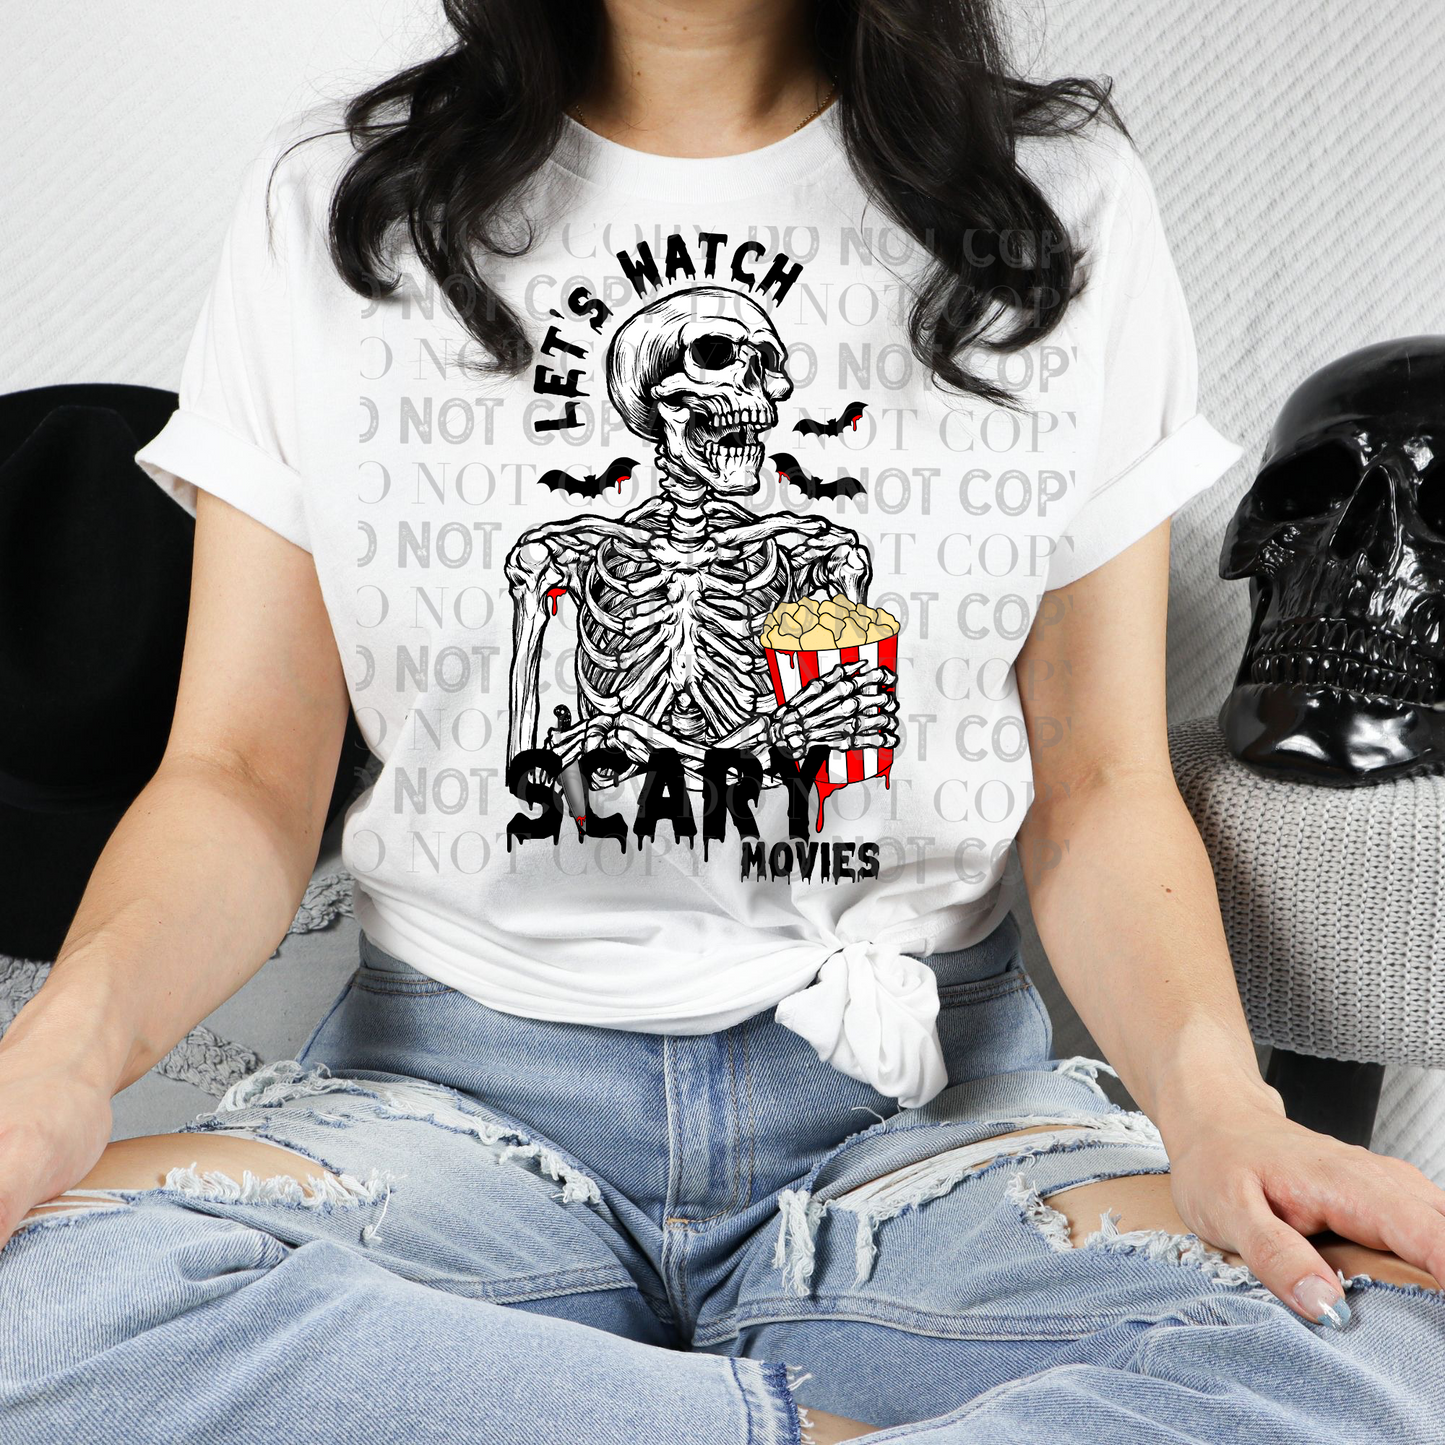 Let's Watch Scary Movies Tee